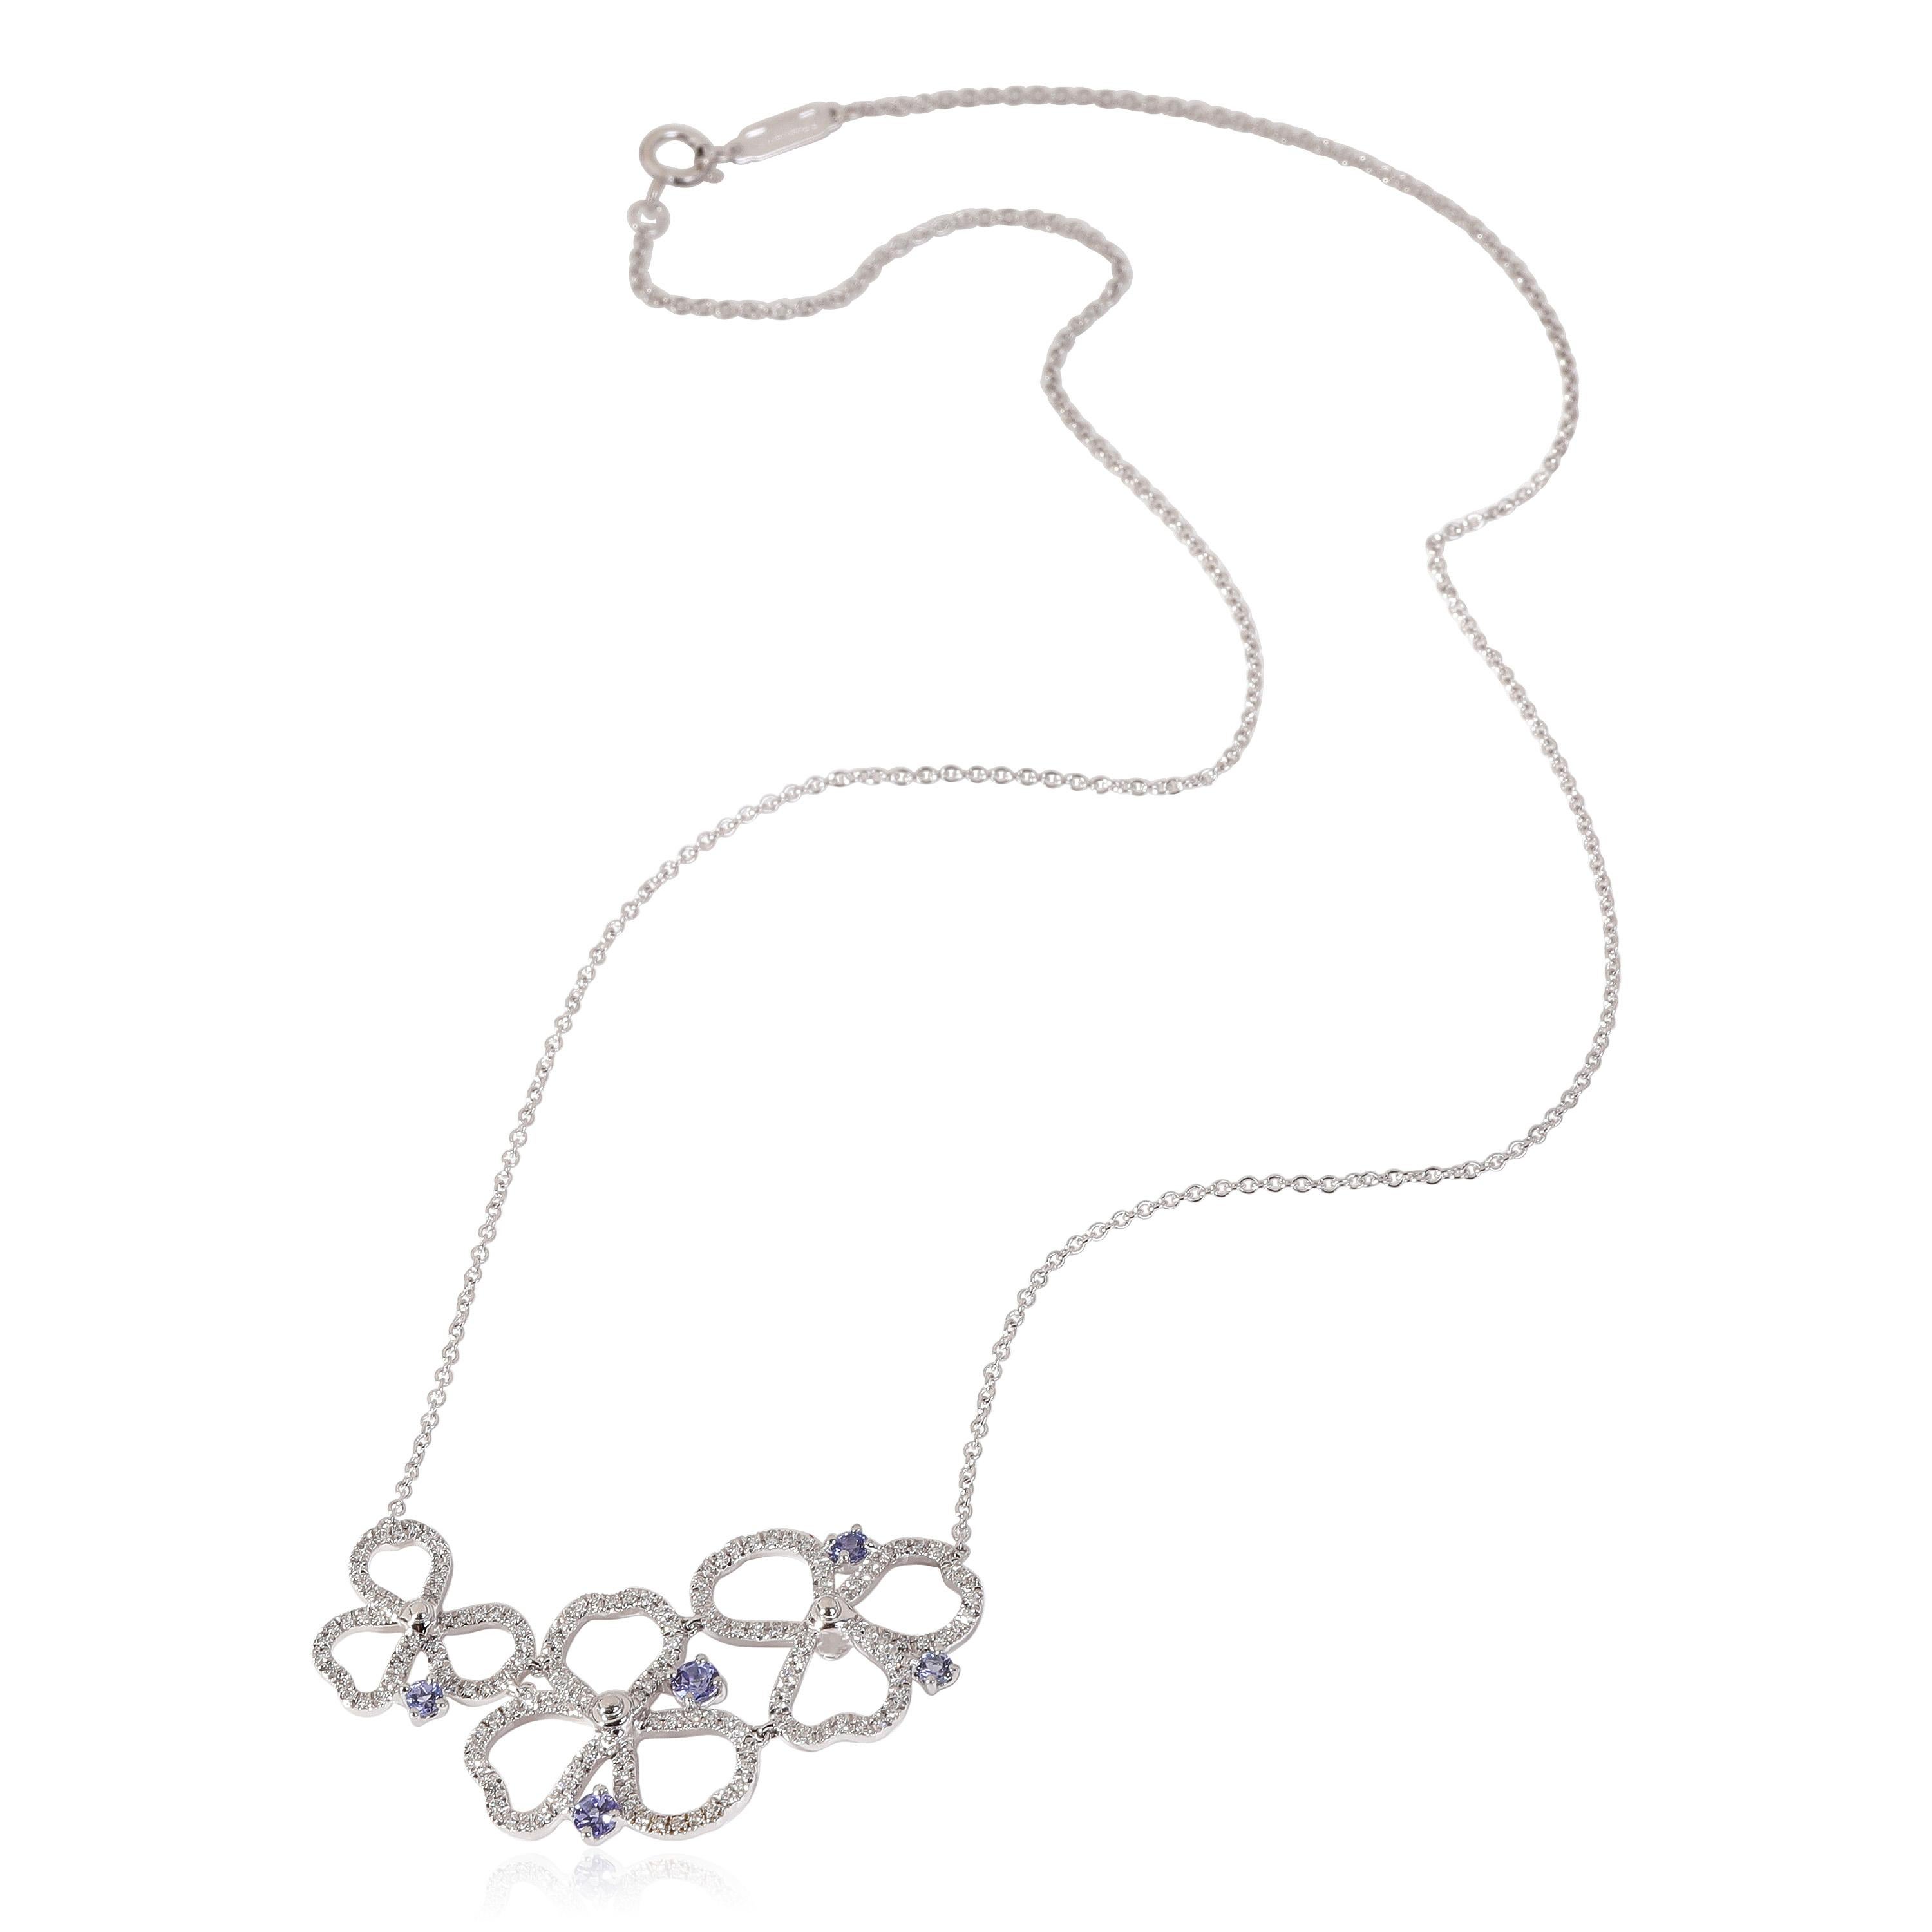 Tiffany & Co. Paper Flowers Necklace with Diamonds & Tanzanite in Platinum

PRIMARY DETAILS
SKU: 120921
Listing Title: Tiffany & Co. Paper Flowers Necklace with Diamonds & Tanzanite in Platinum
Condition Description: Retails for 7000 USD. In